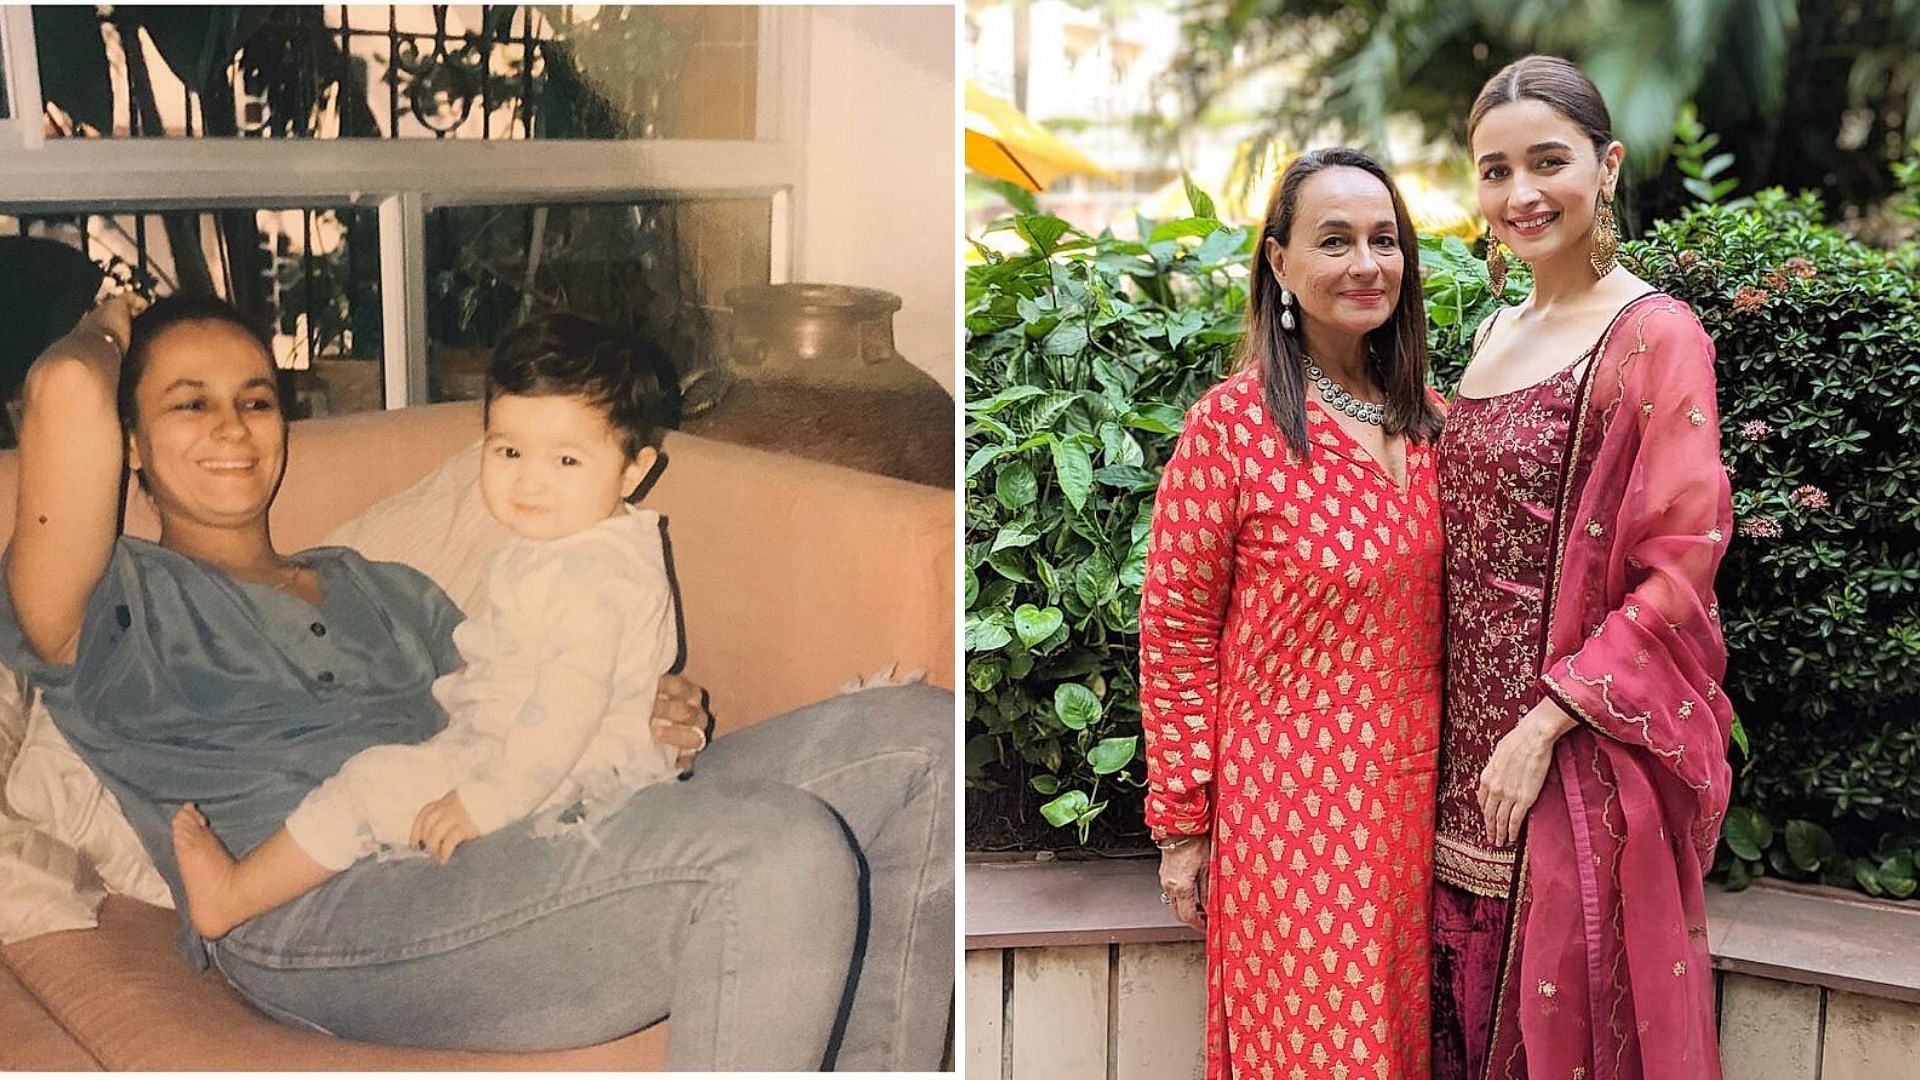 On Soni Razdan’s birthday, we list 10 of our favourite pictures of the mother-daughter duo.